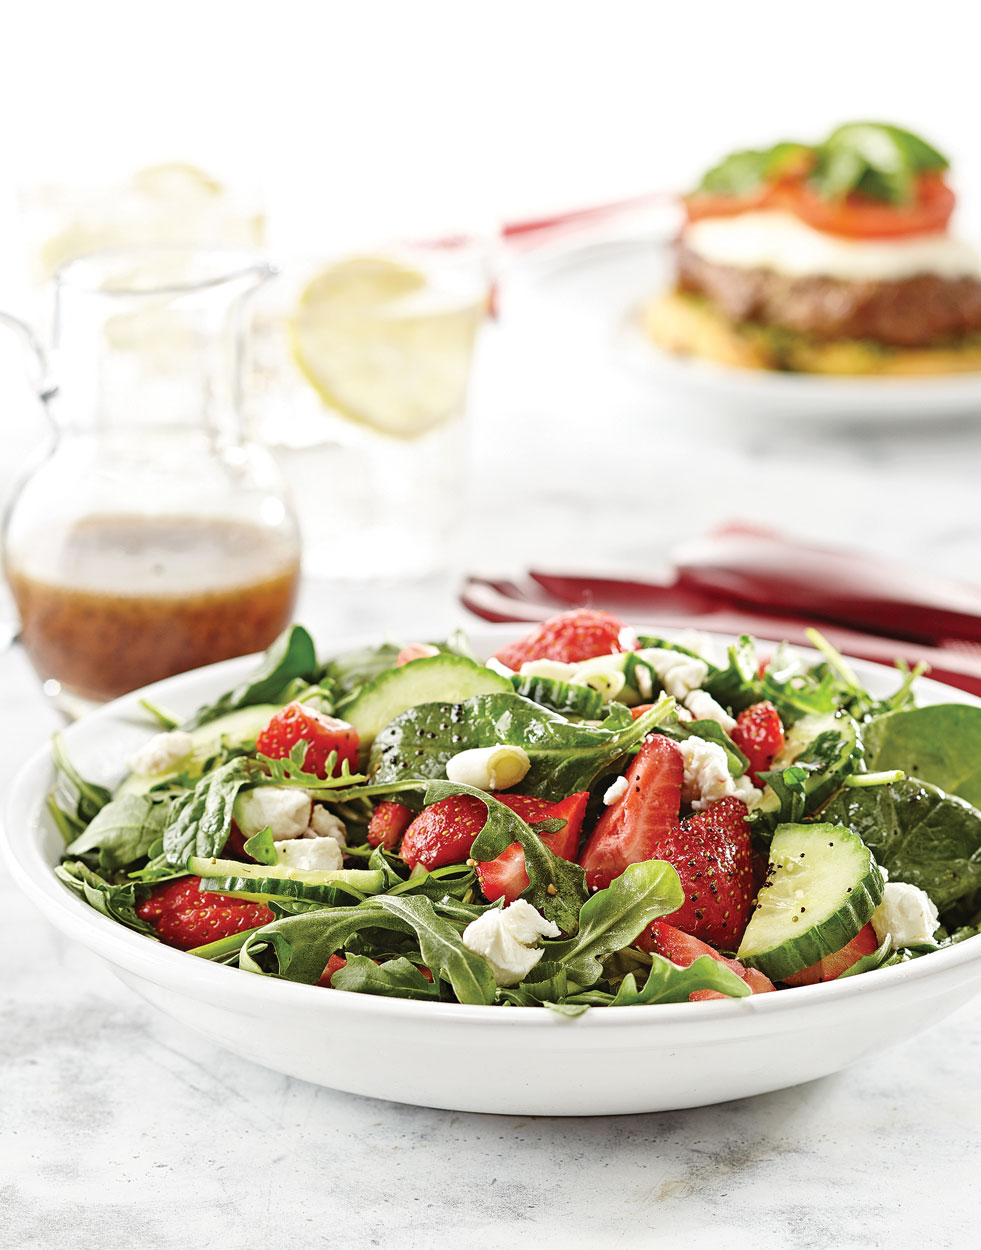 Strawberry Salad with poppy seed vinaigrette